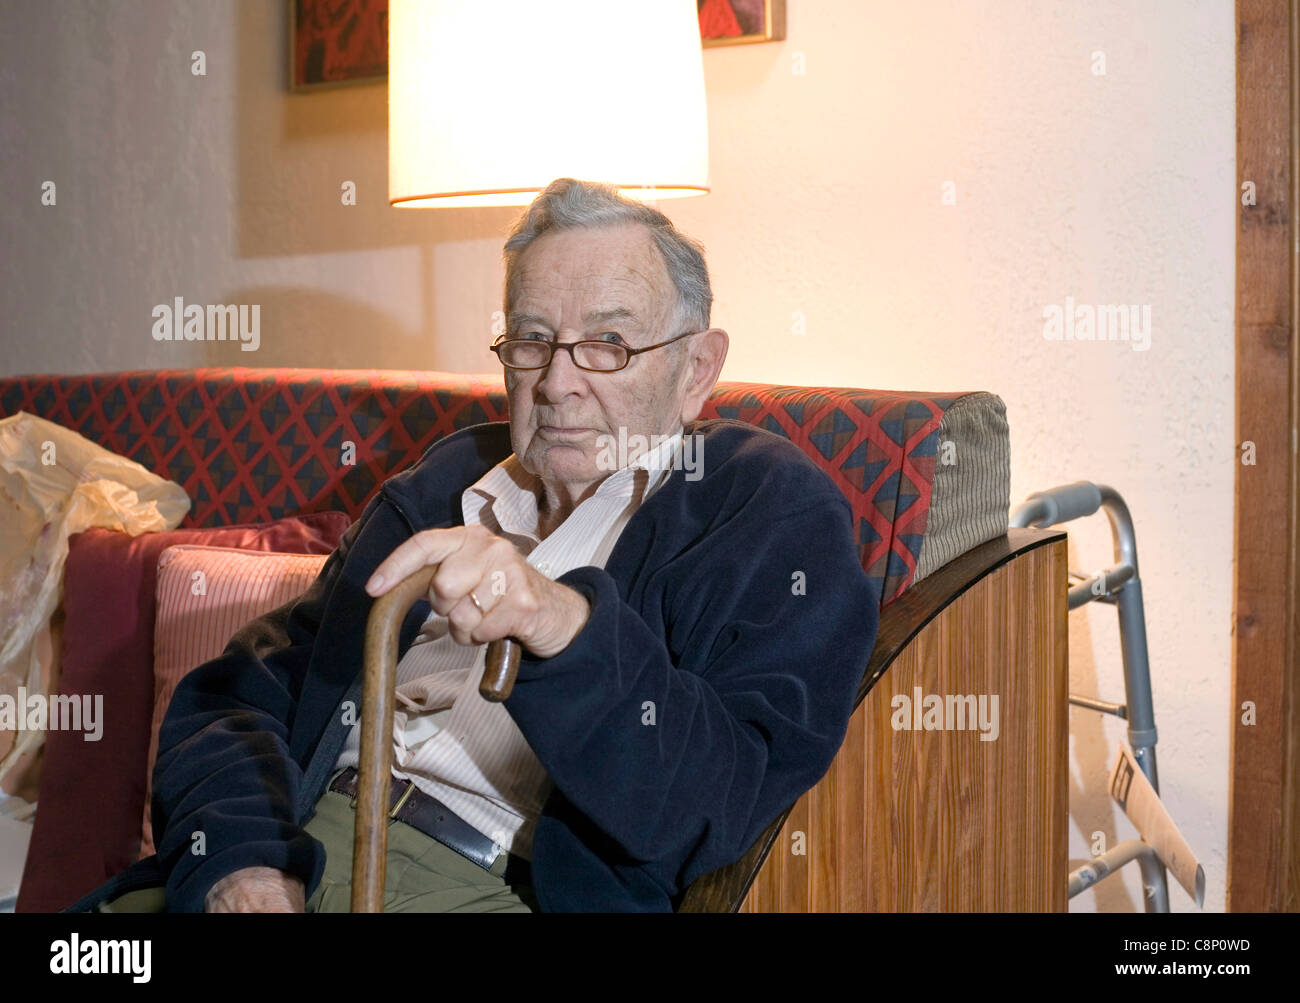 A senior man sitting and holding his cane. Stock Photo